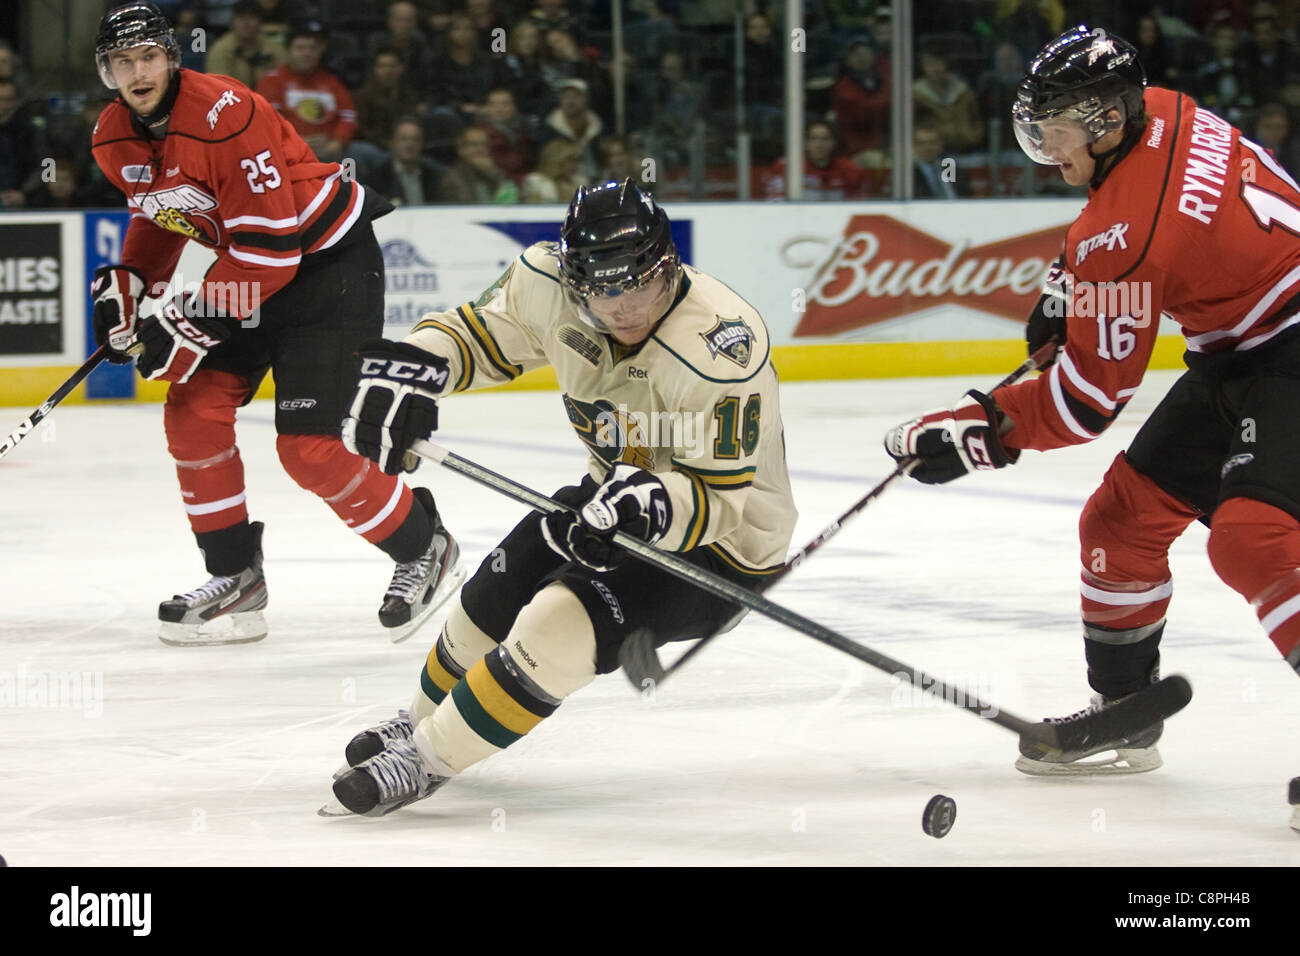 London Ontario, Canada - October 28, 2011. Max Domi (16) of the London Knights carries the puck between two Owen Sound Attack players Daniel Zweep (25) and Devon Rymarchuk (16). London won the game in overtime 3-2. Stock Photo